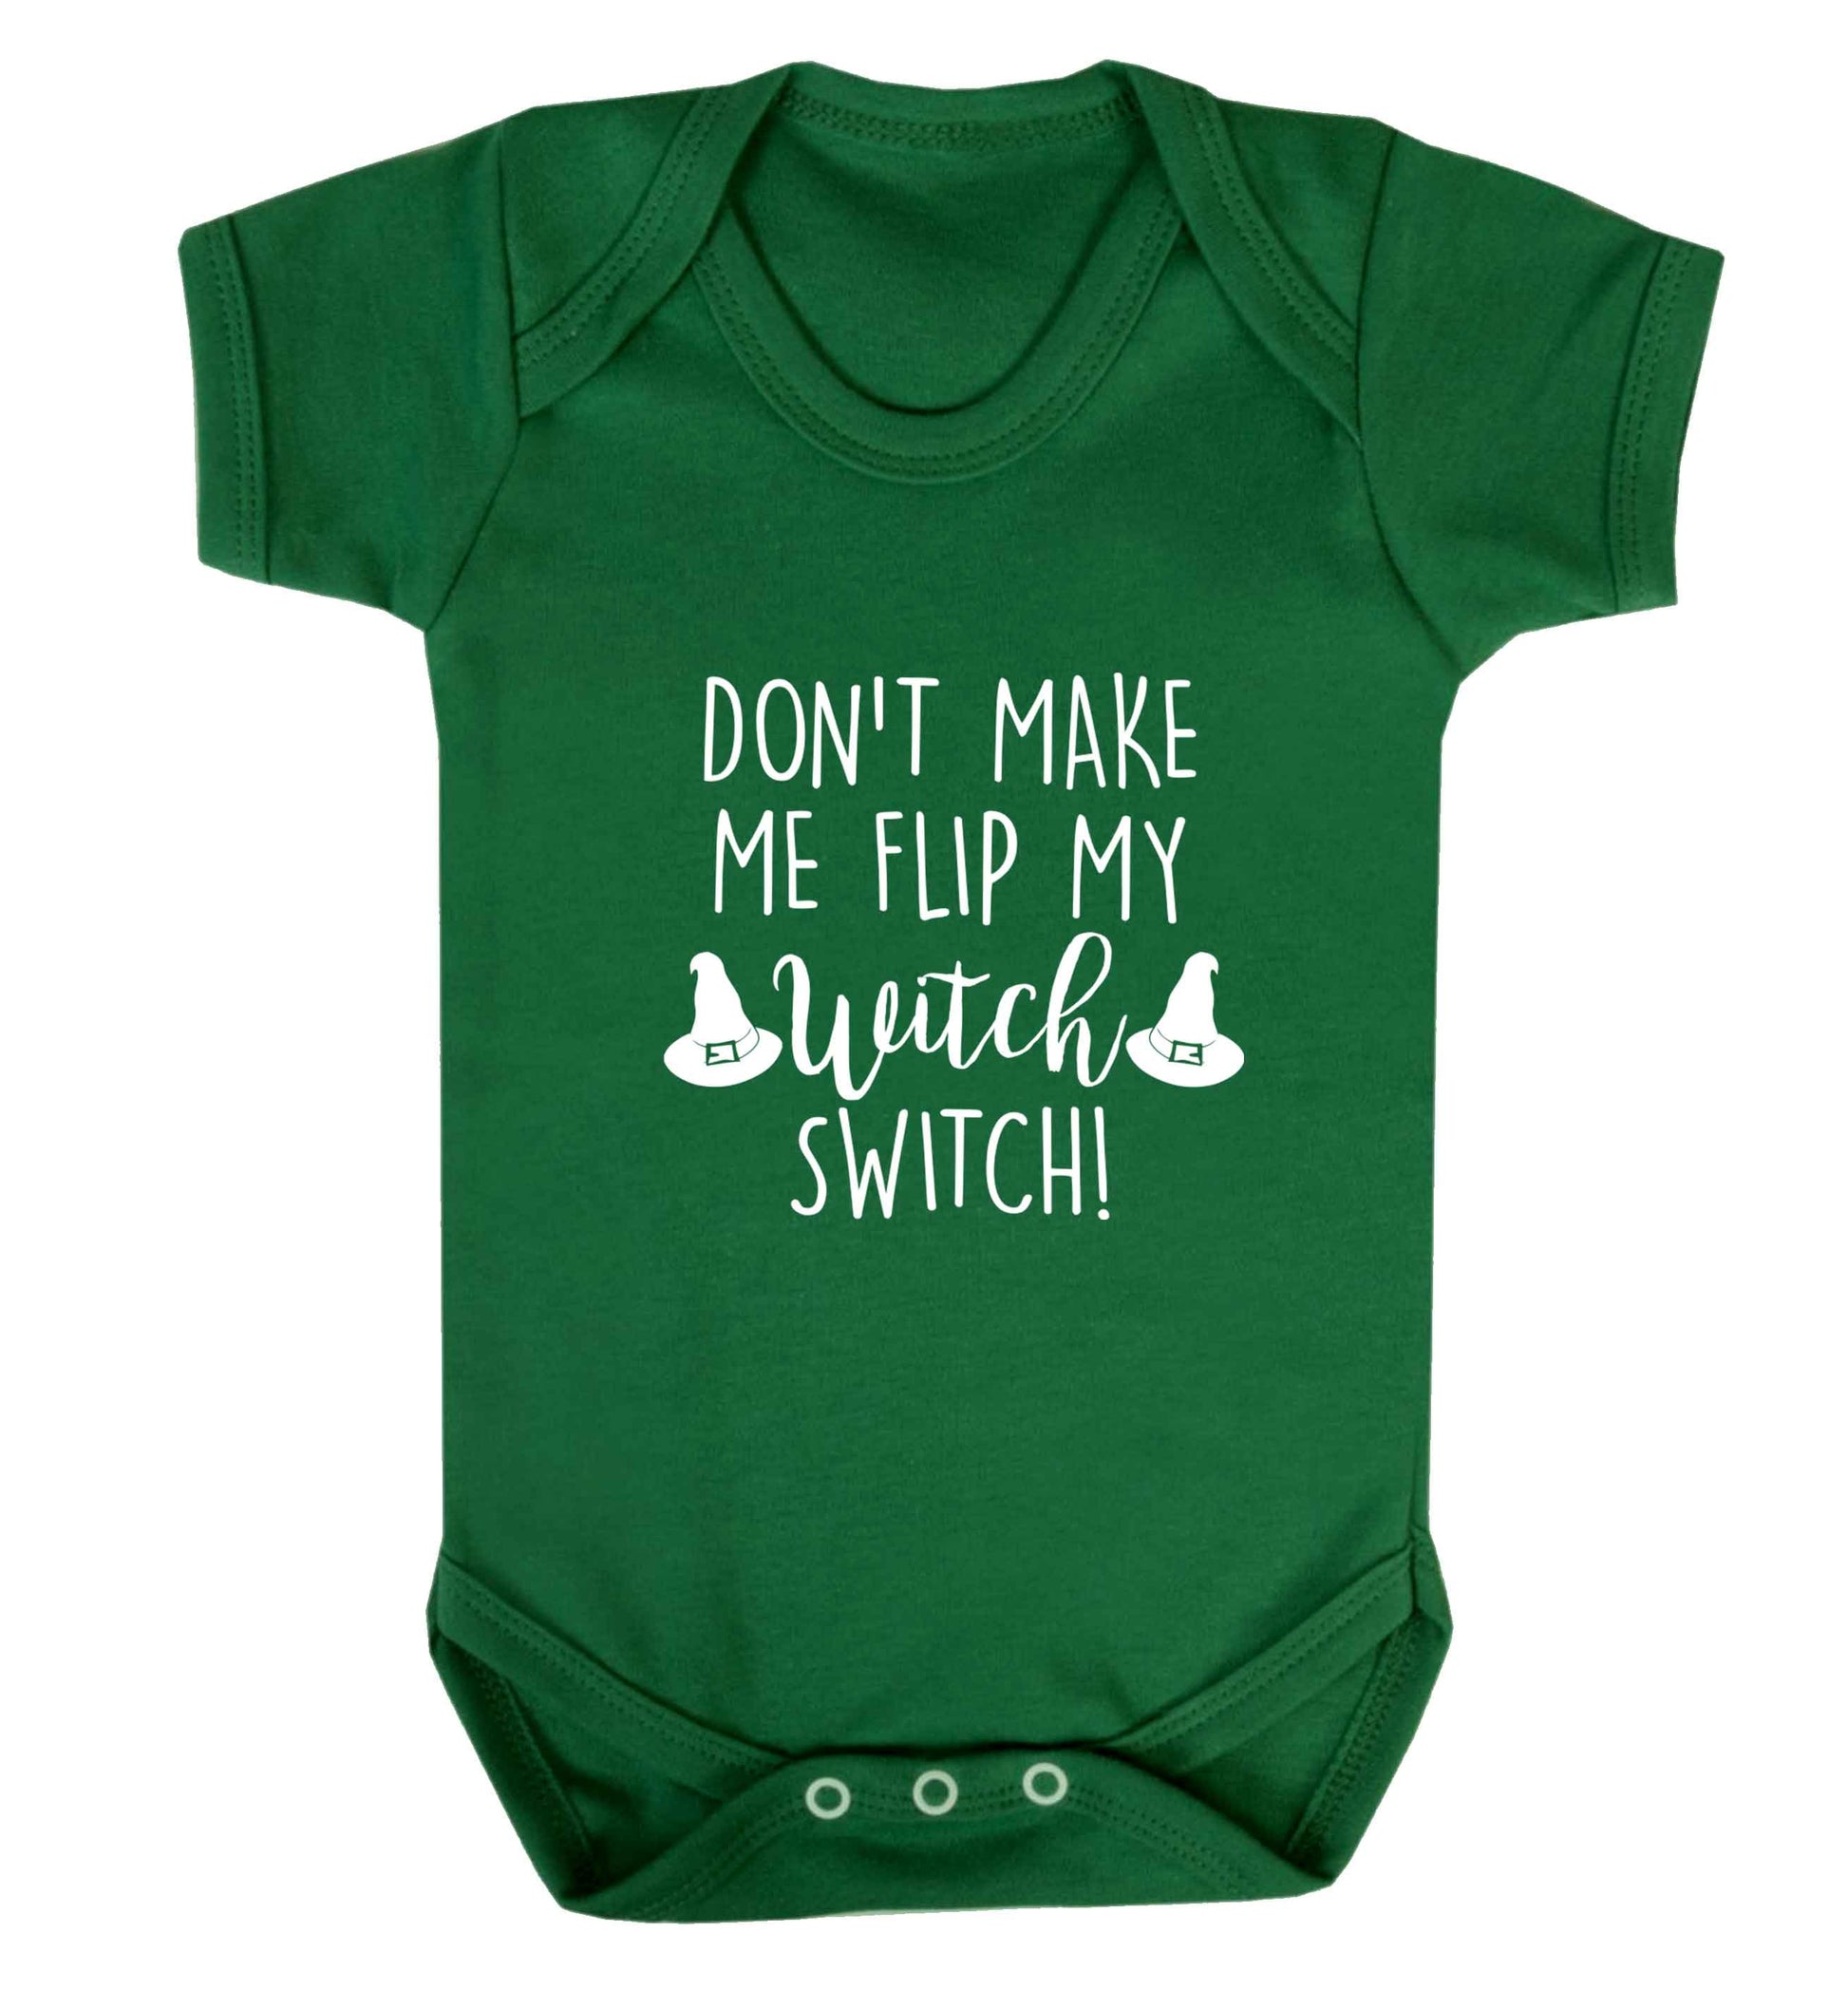 Don't make me flip my witch switch baby vest green 18-24 months